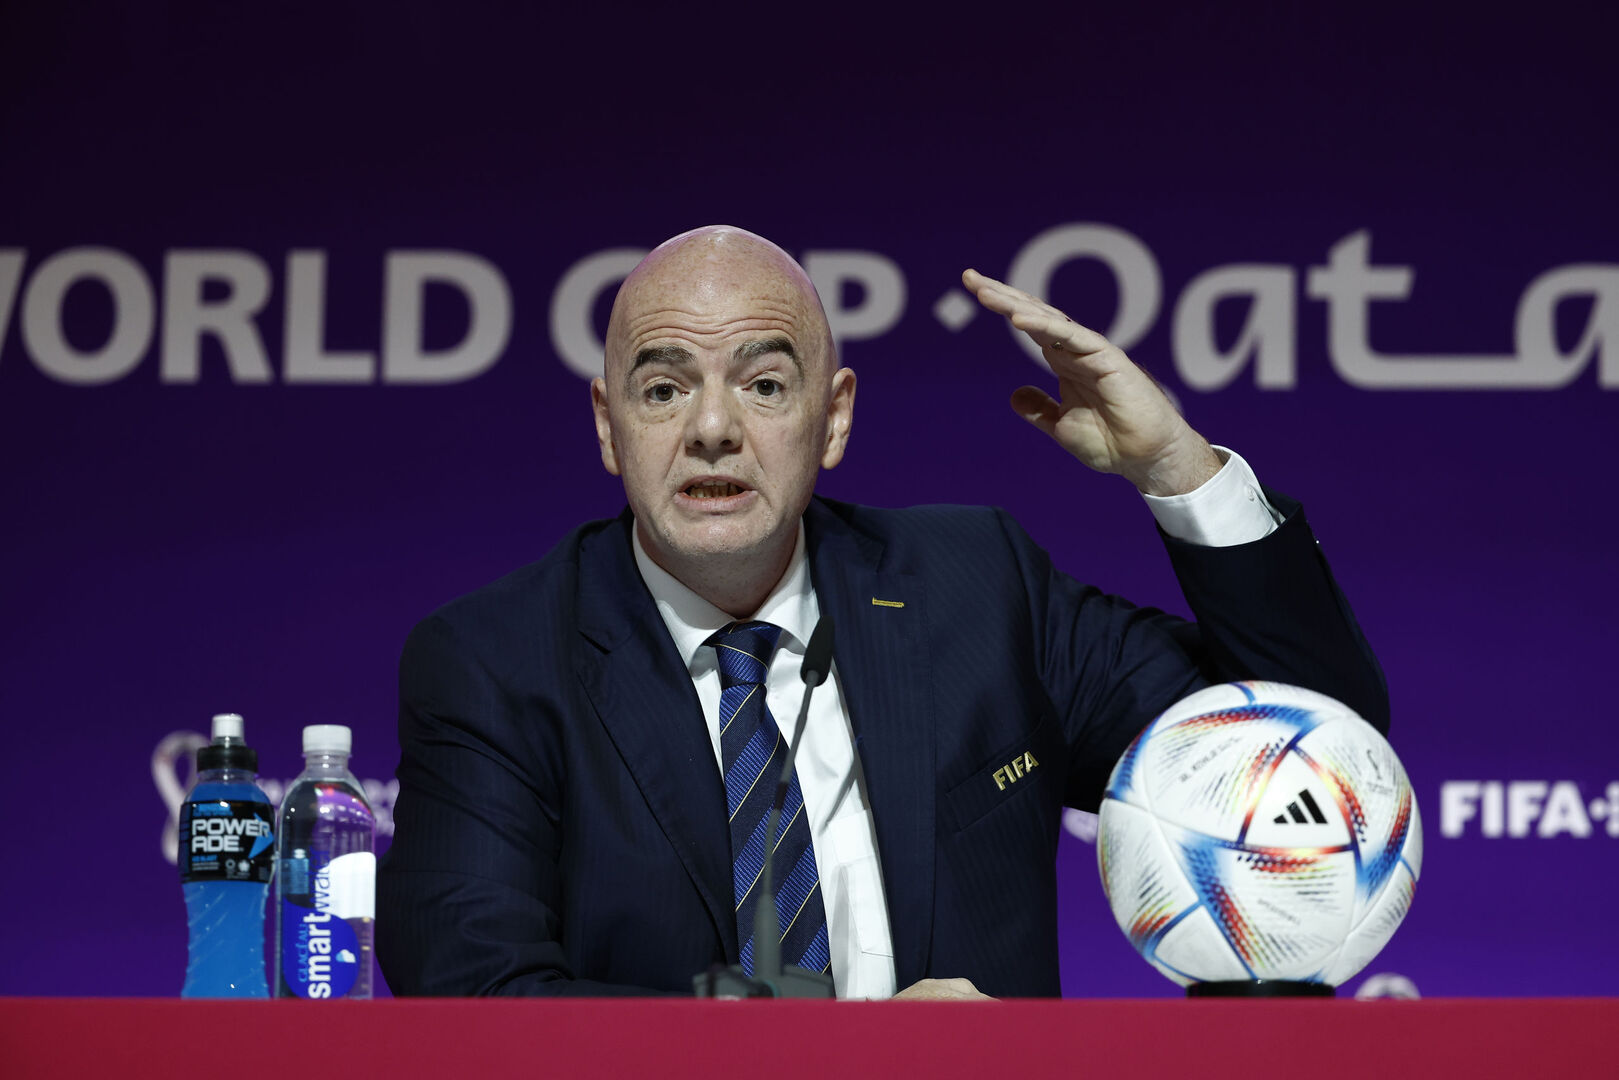 FIFA World Cup prize money explained: $440m in Qatar 2022 pot